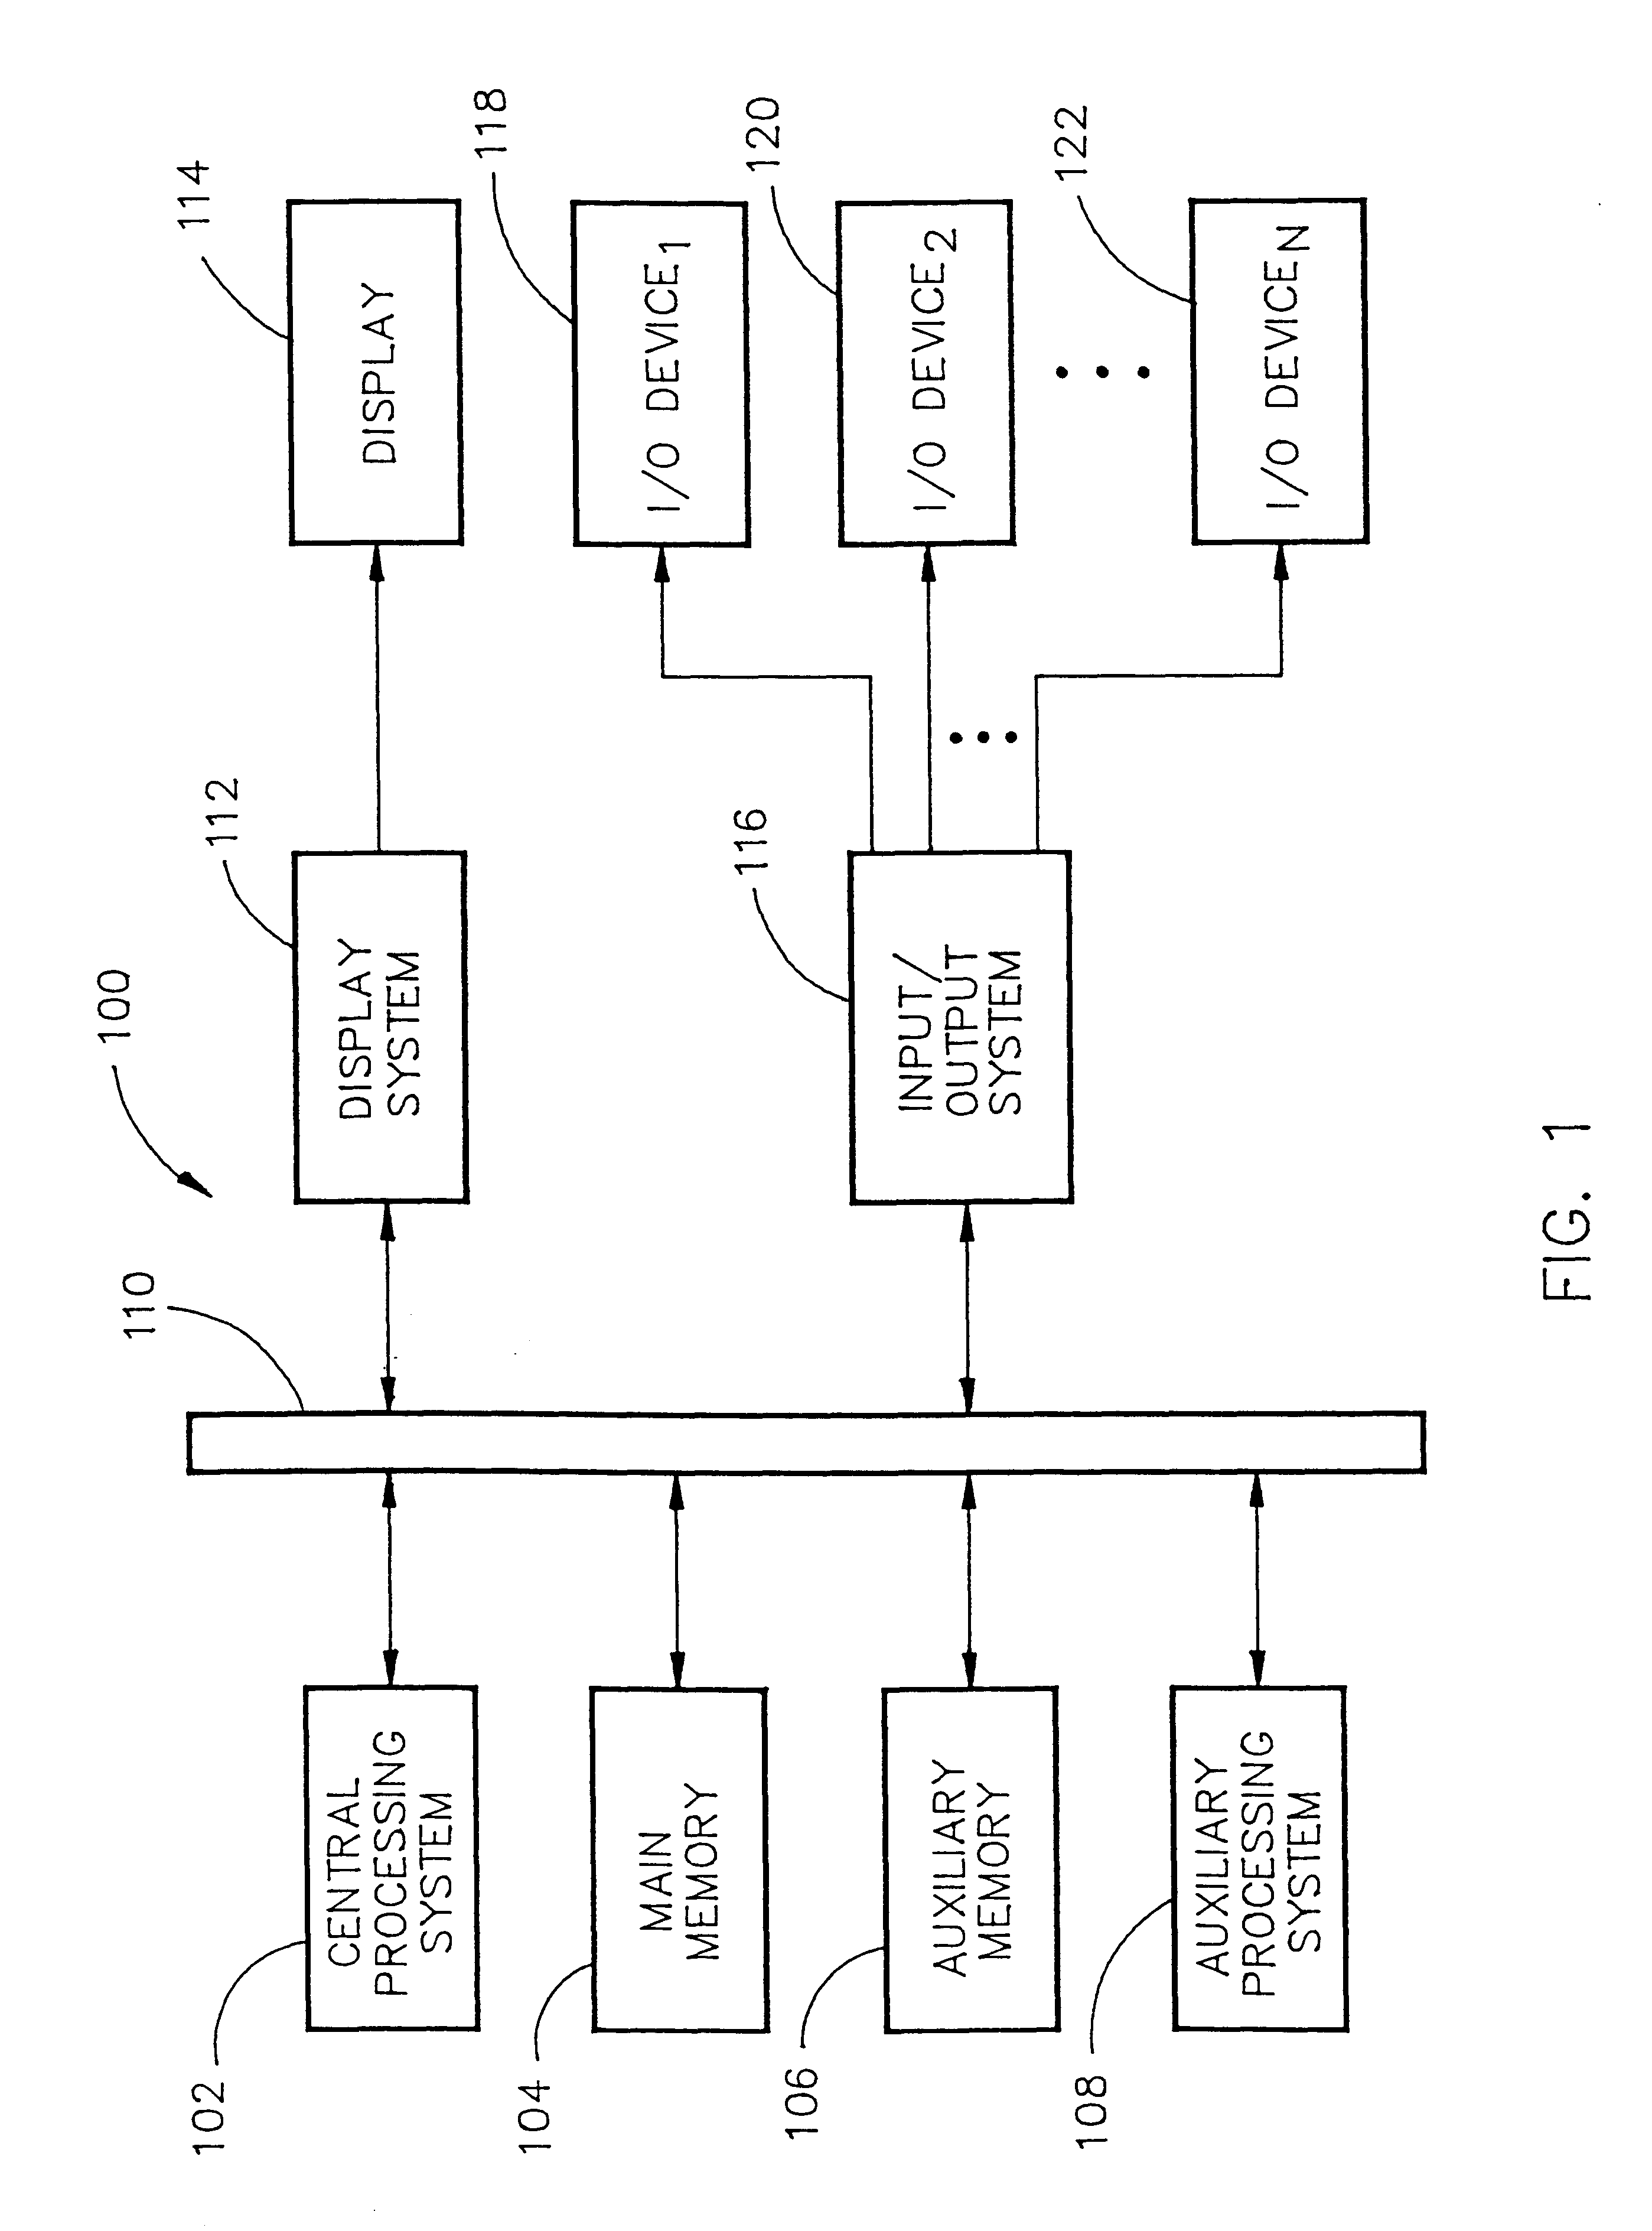 Method for delivering and caching preprocessed search results to improve performance of background information searches on a convergence device